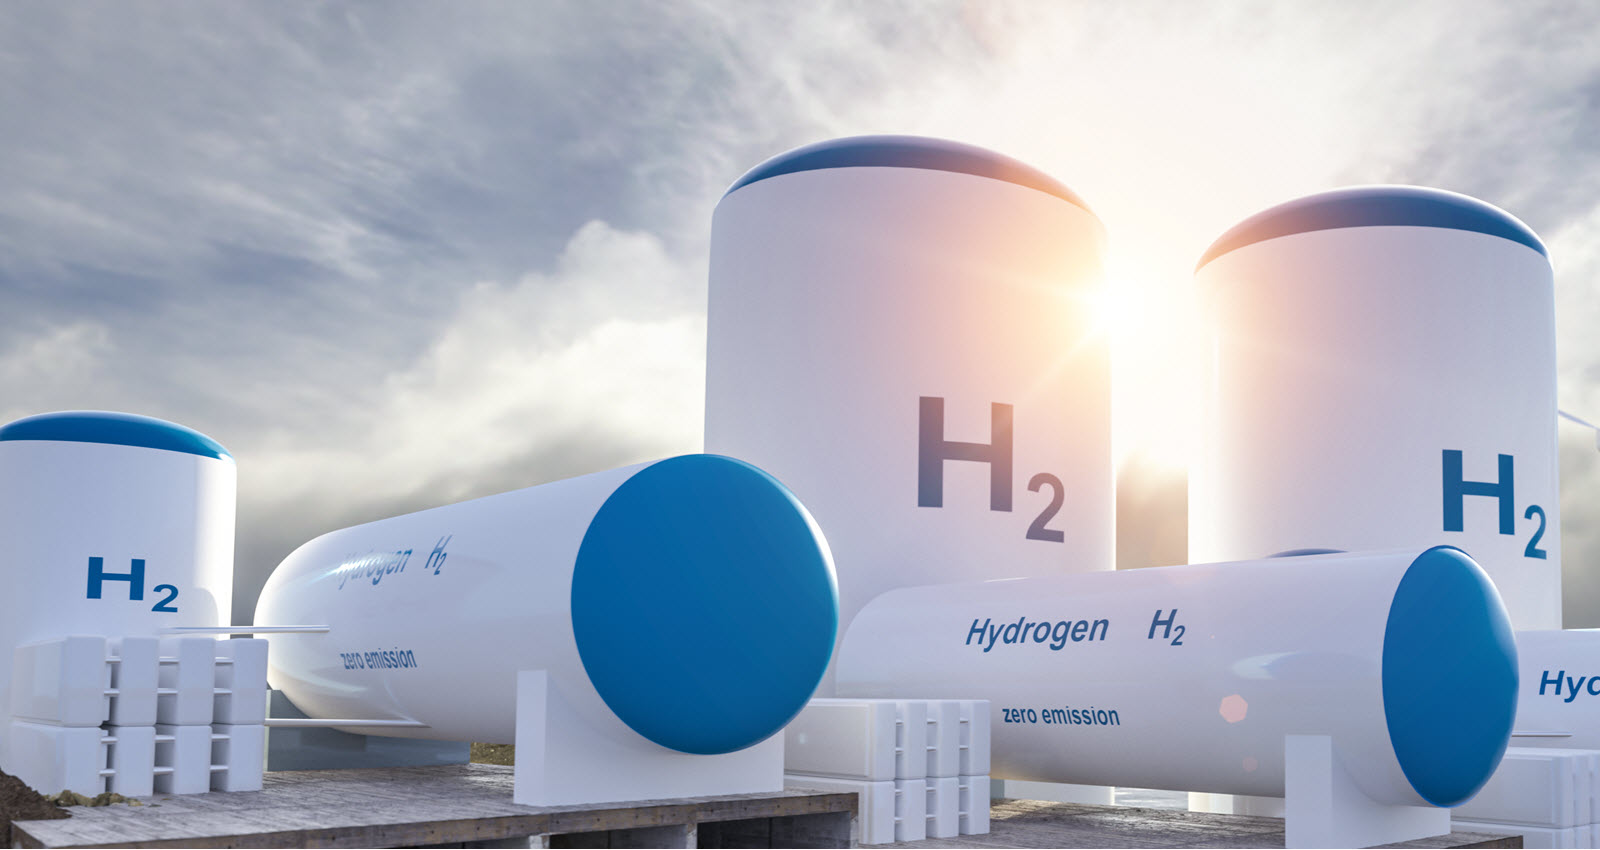 Lhyfe commsions 5 MW hydrogen plant in France